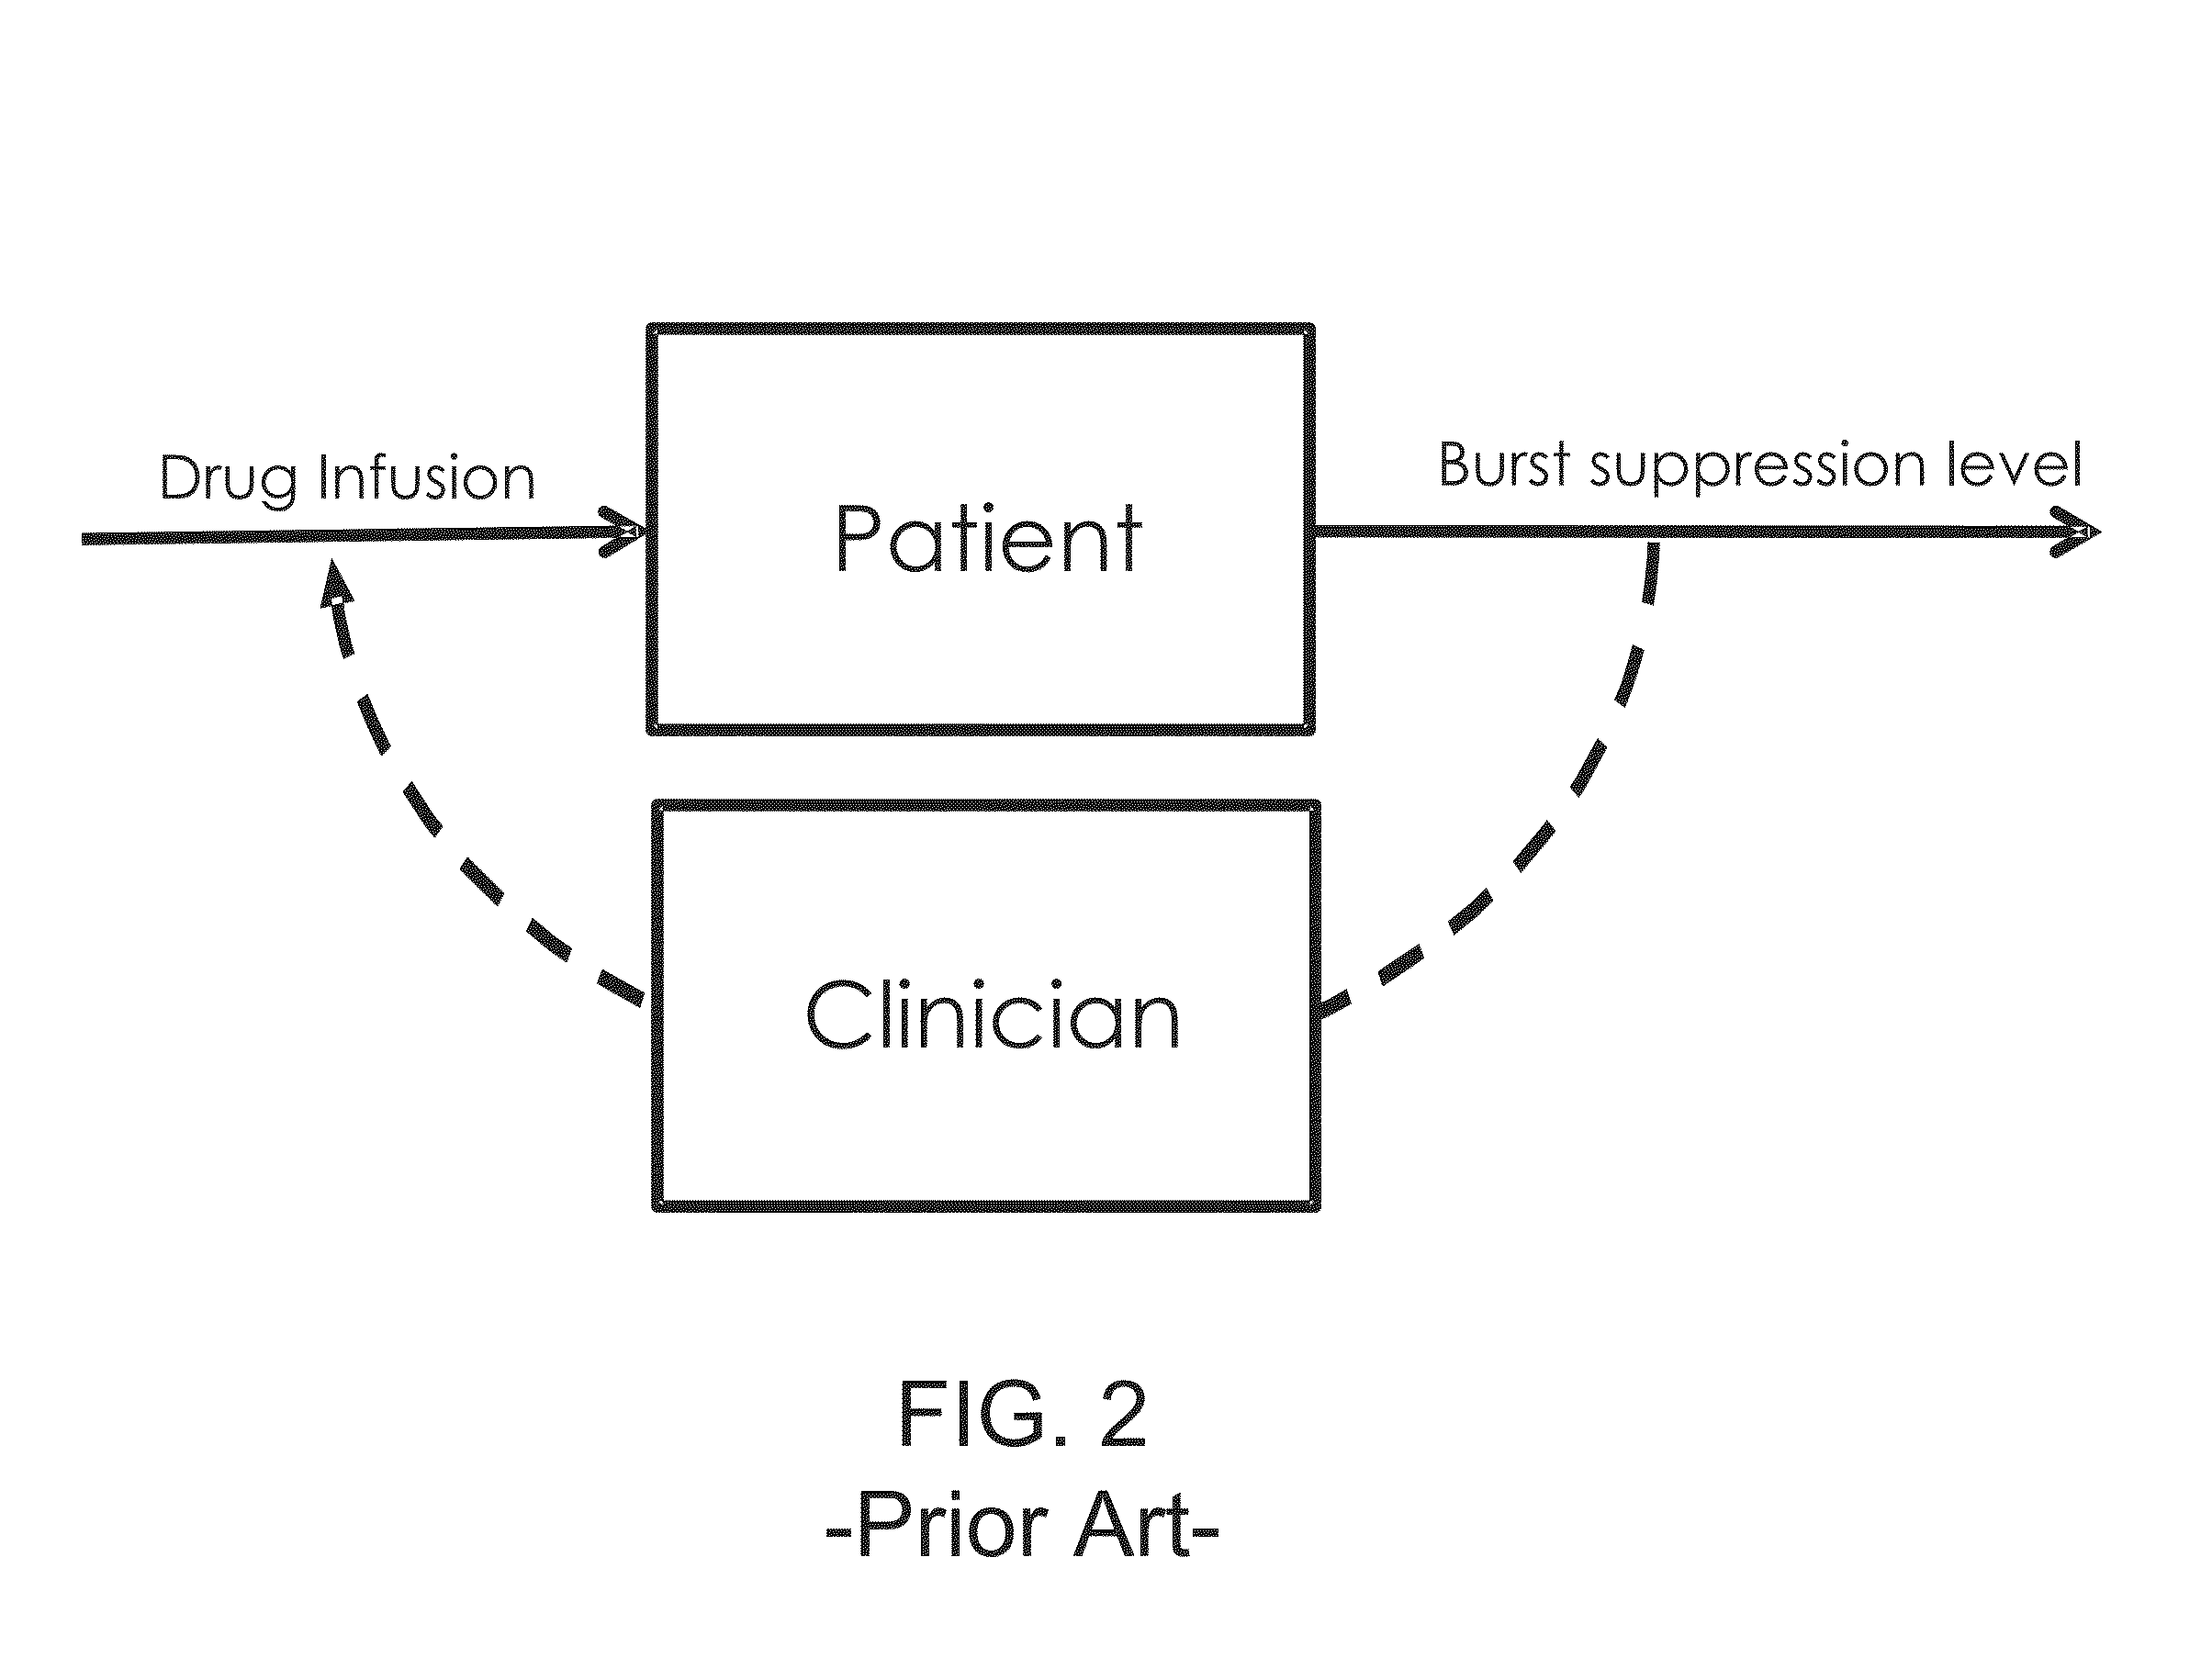 System and method for monitoring and controlling a state of a patient during and after administration of anesthetic compound